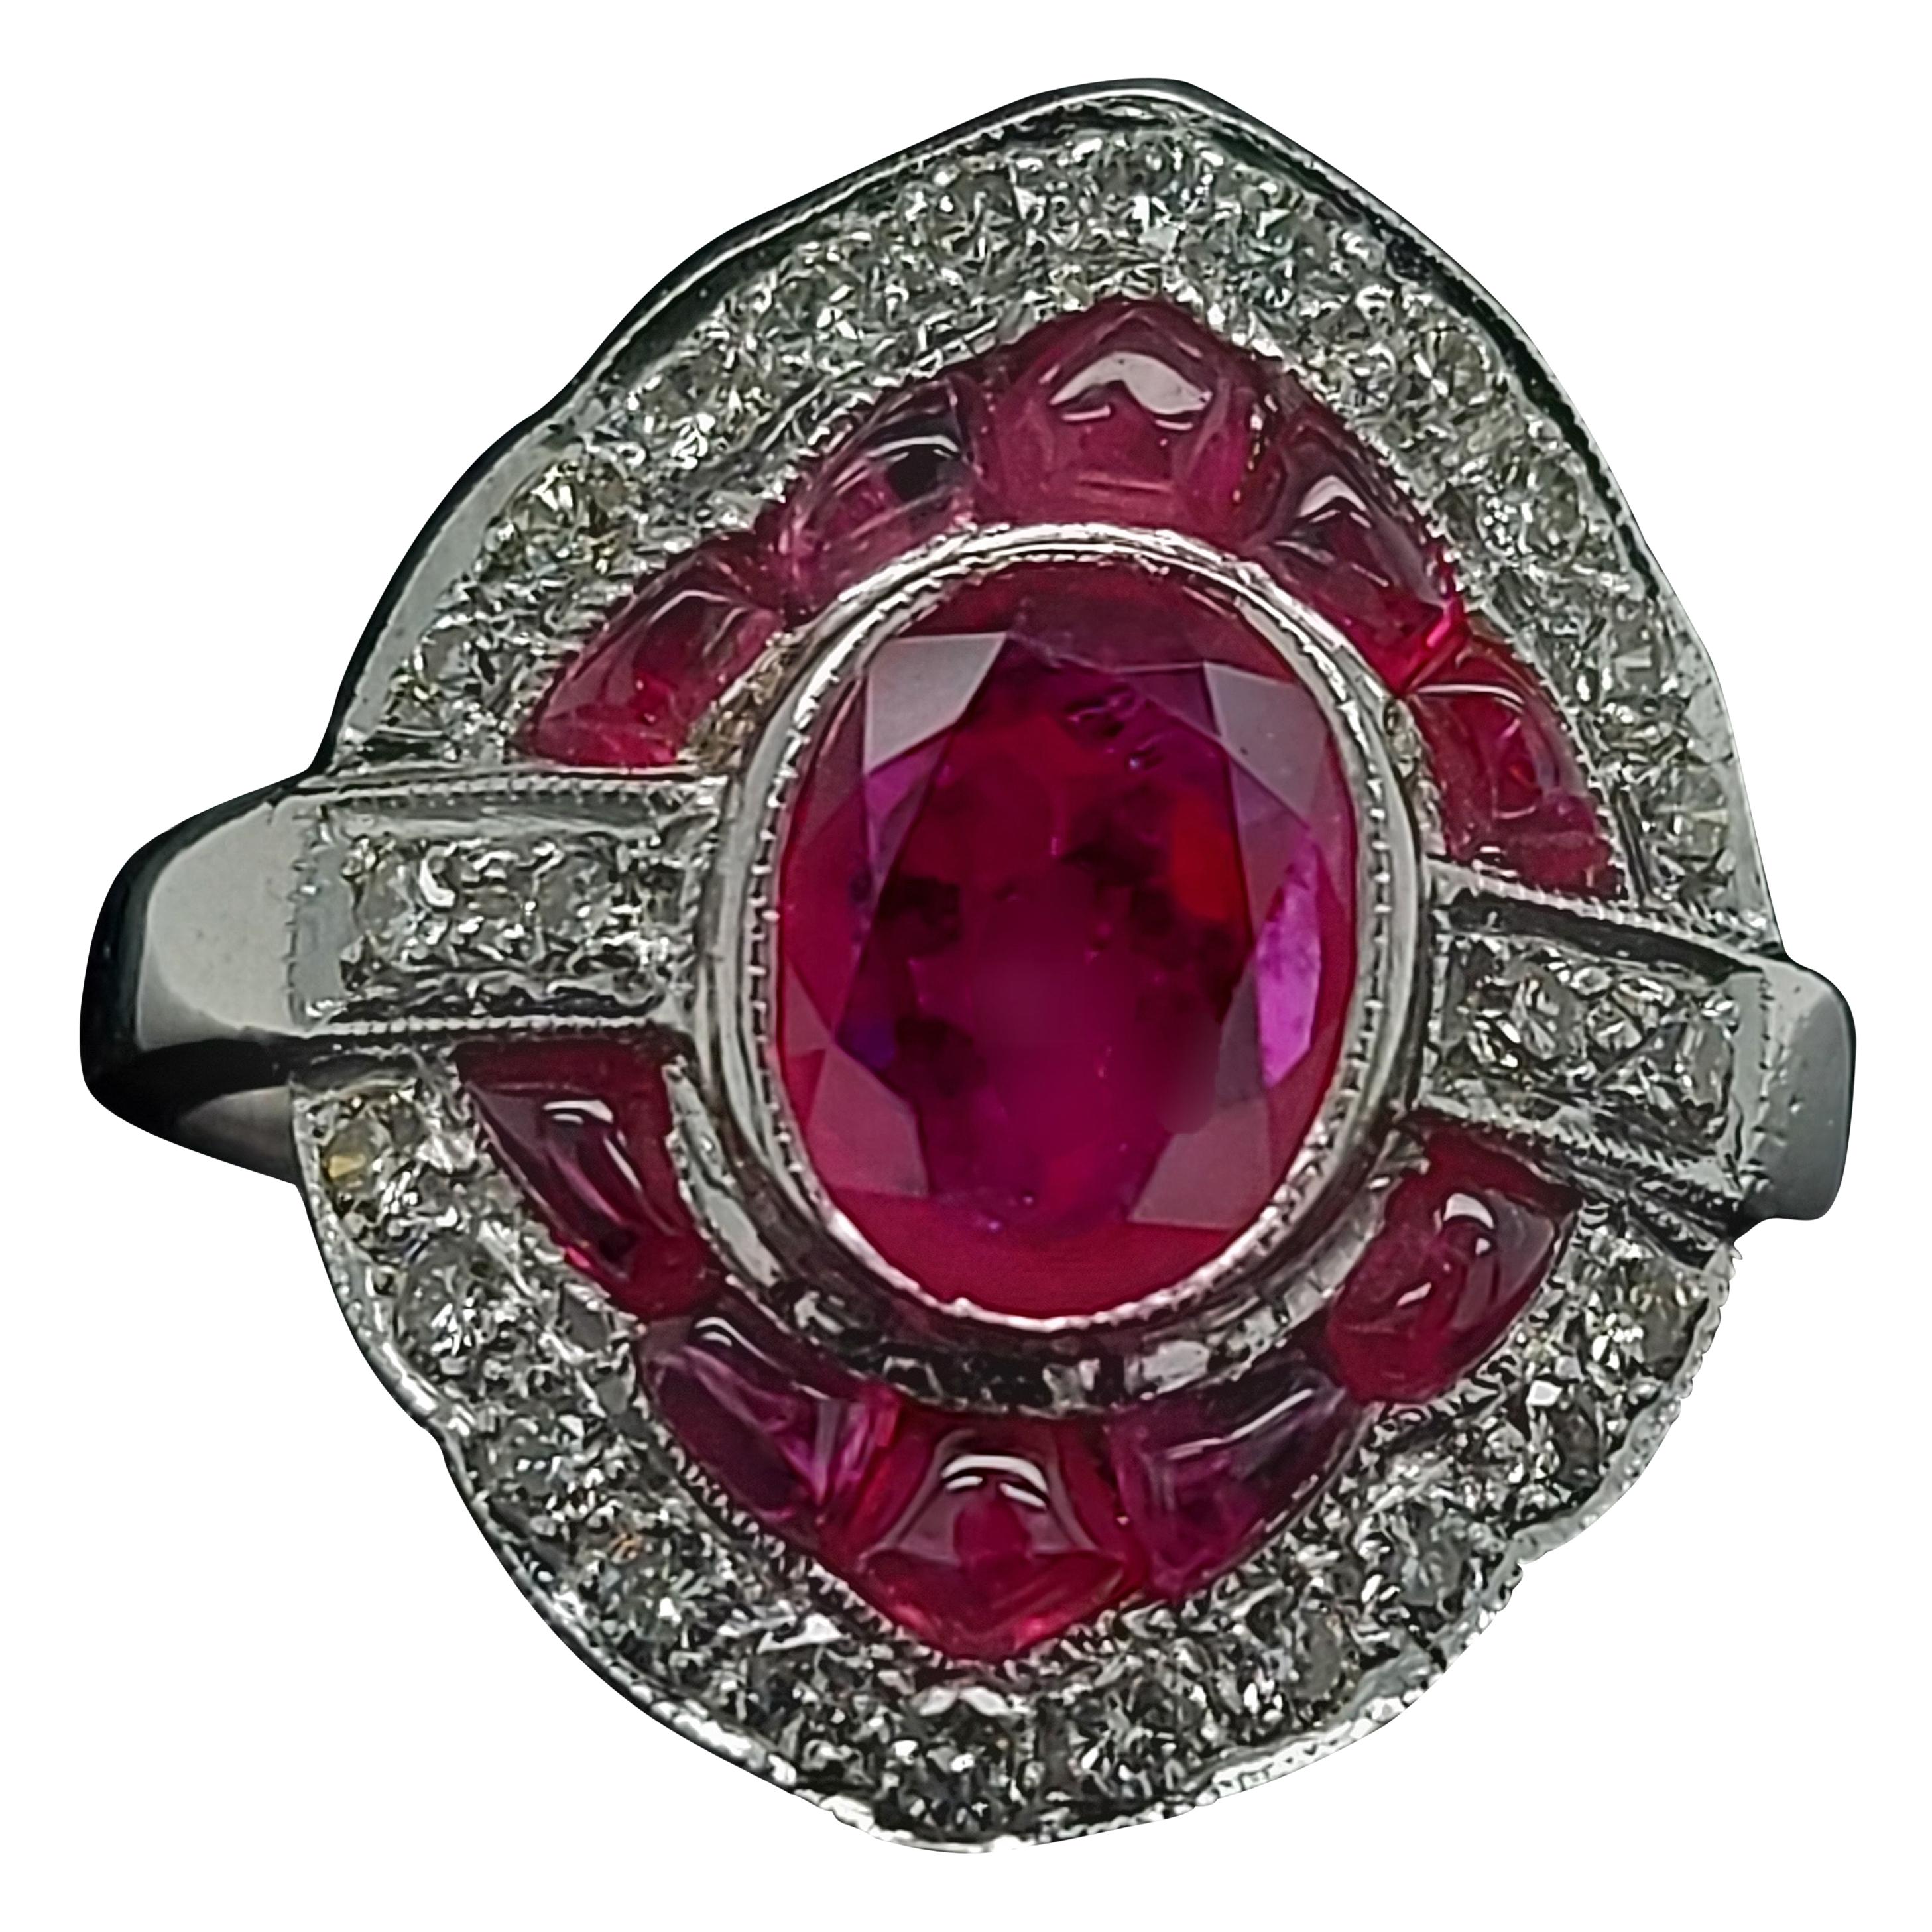 Stunning 18 Karat White Gold Ring with Rubies and Brilliant Cut Diamonds